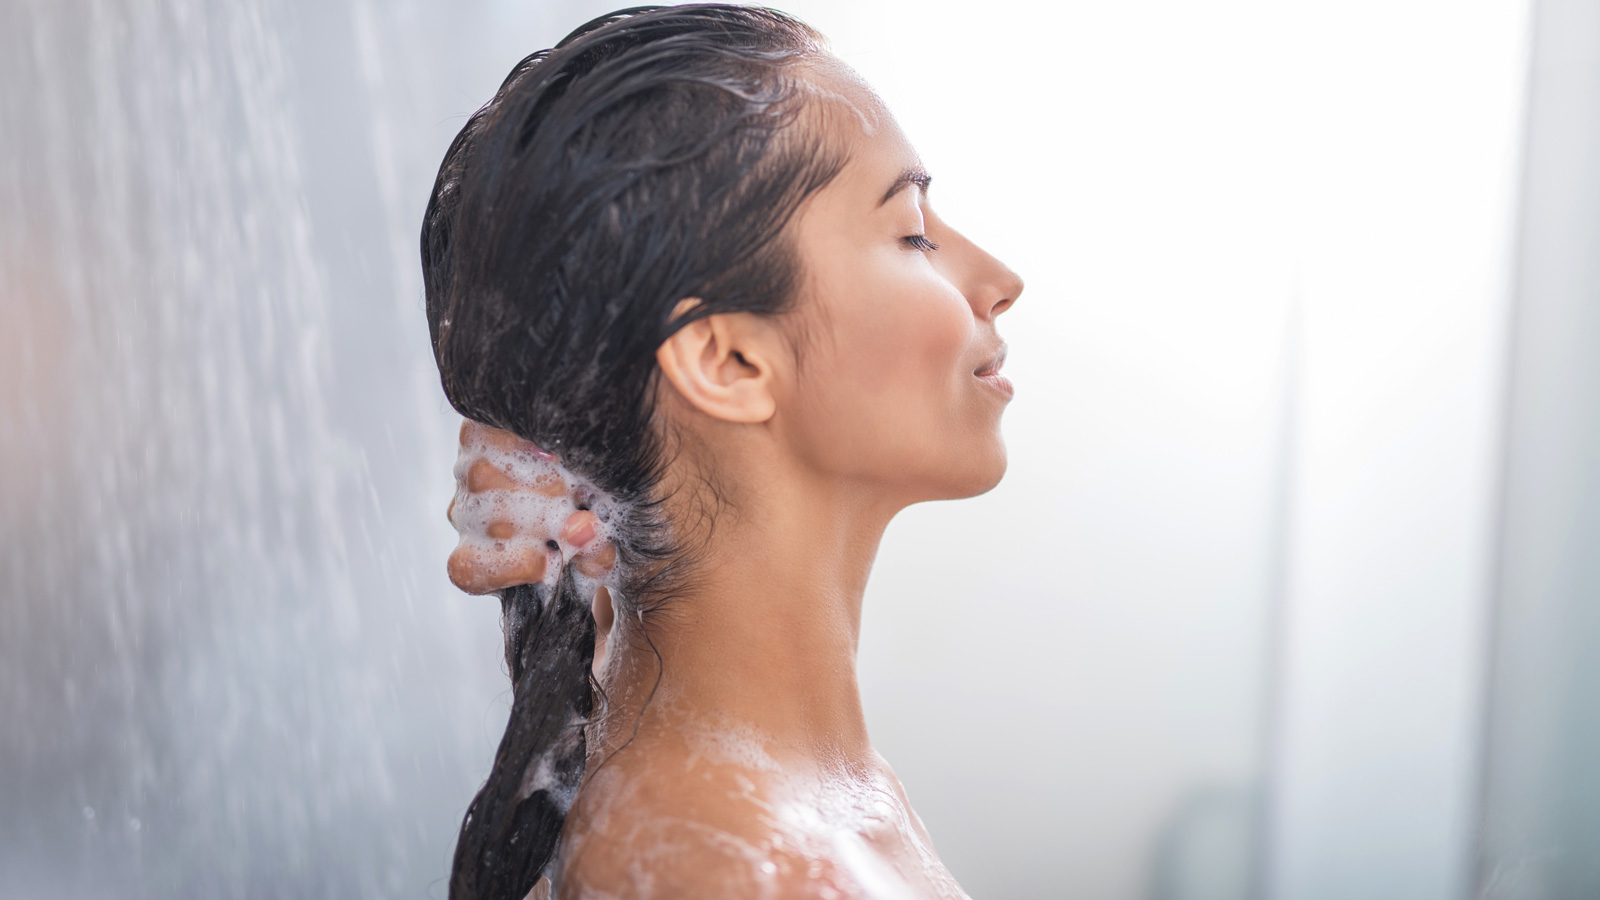 A person washing their hair with hot water from a shower.